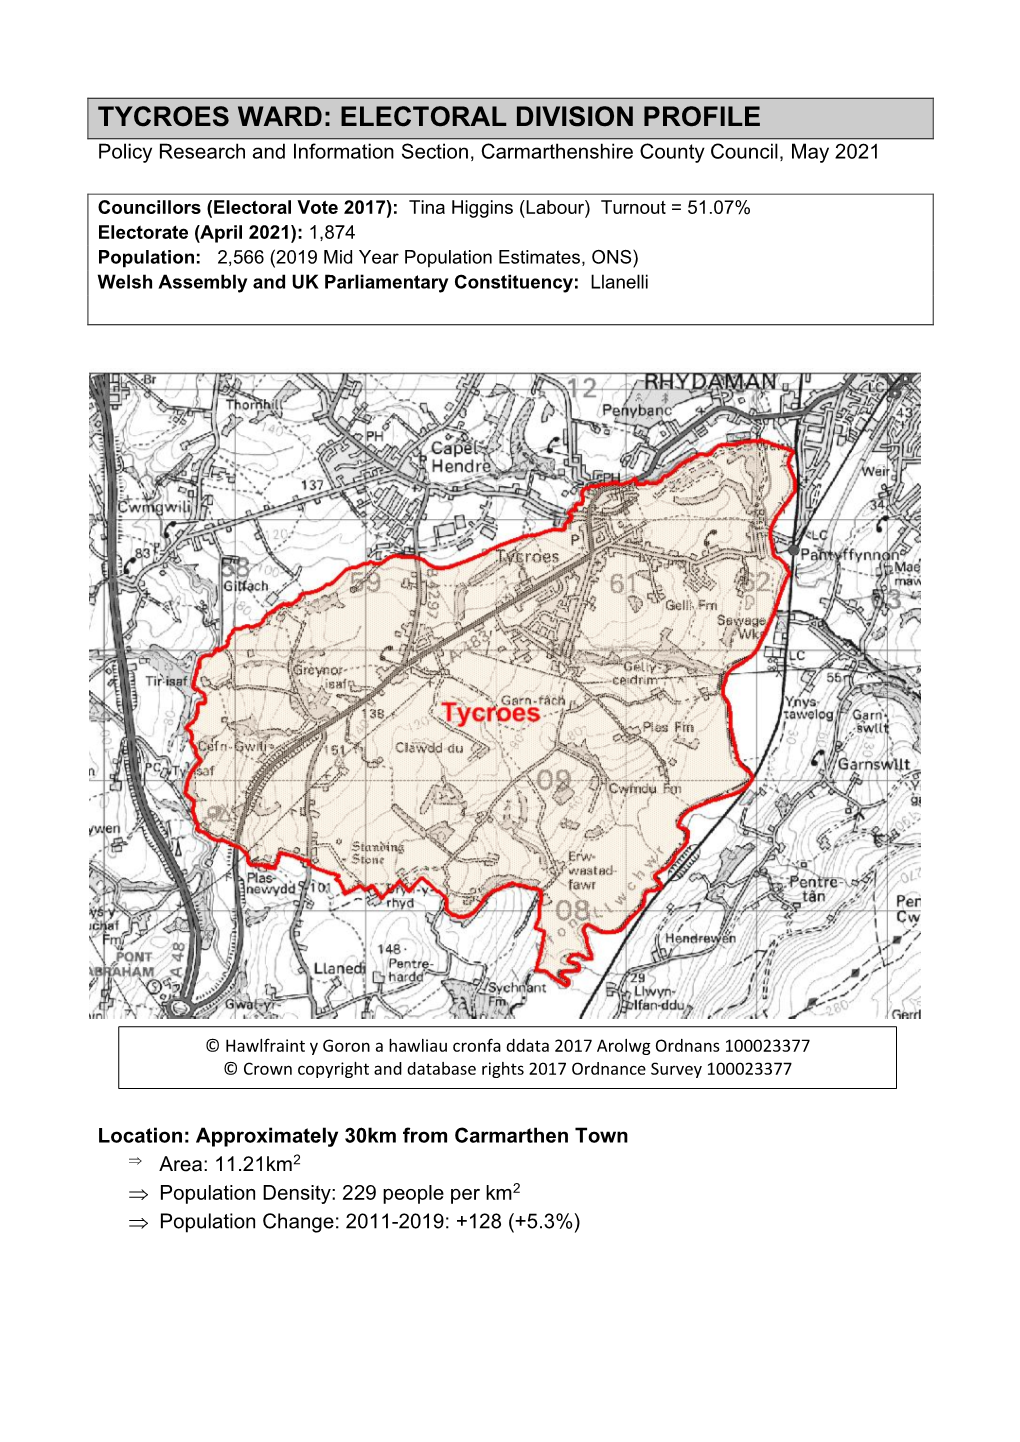 TYCROES WARD: ELECTORAL DIVISION PROFILE Policy Research and Information Section, Carmarthenshire County Council, May 2021